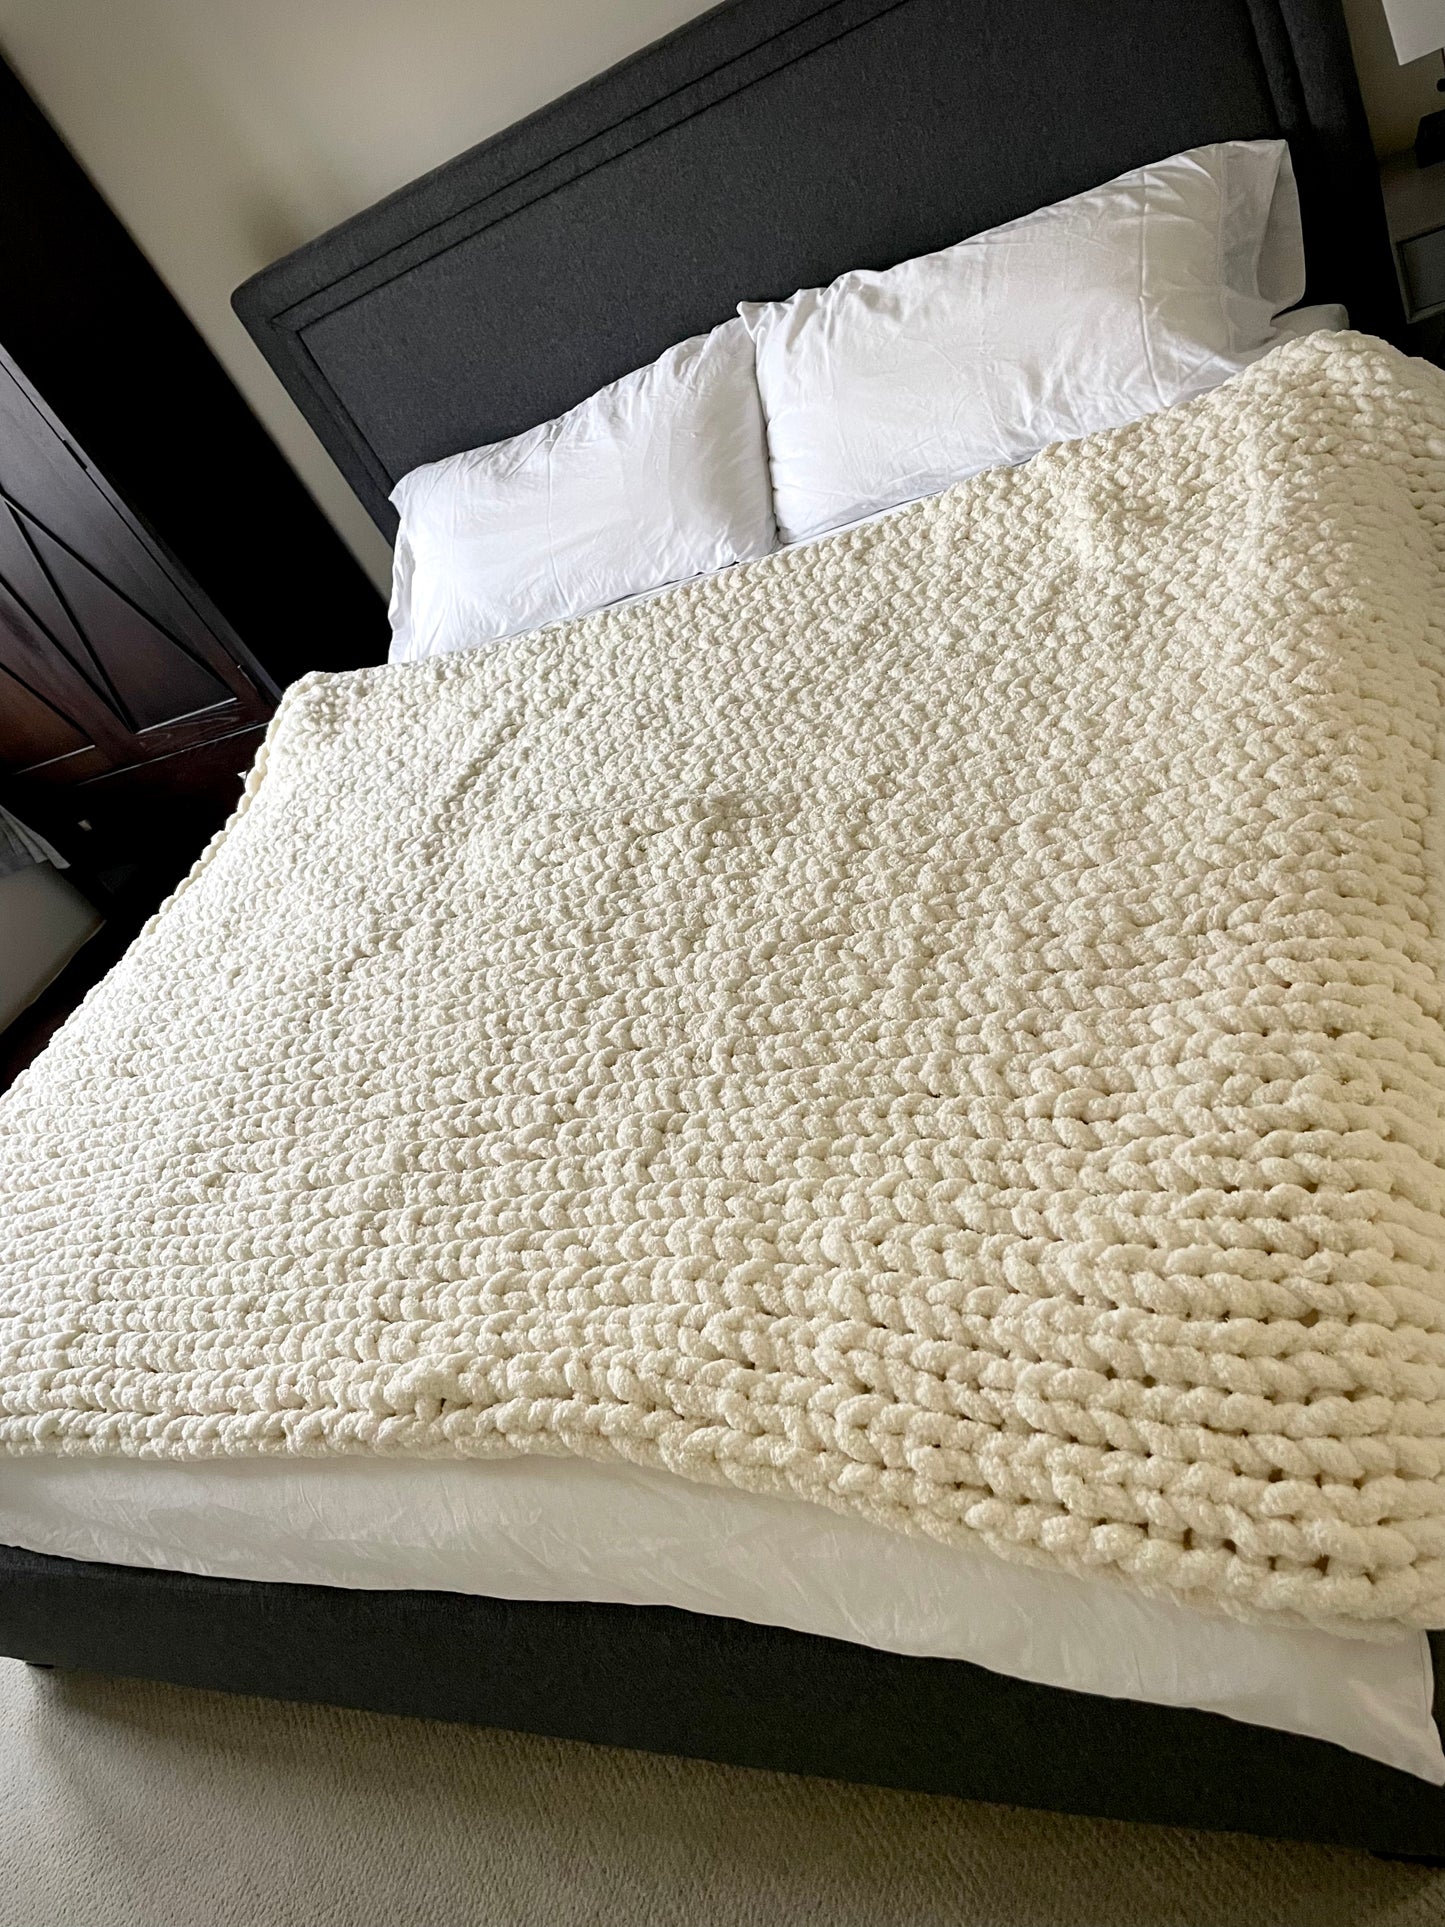 King Size Chunky Knit Blanket